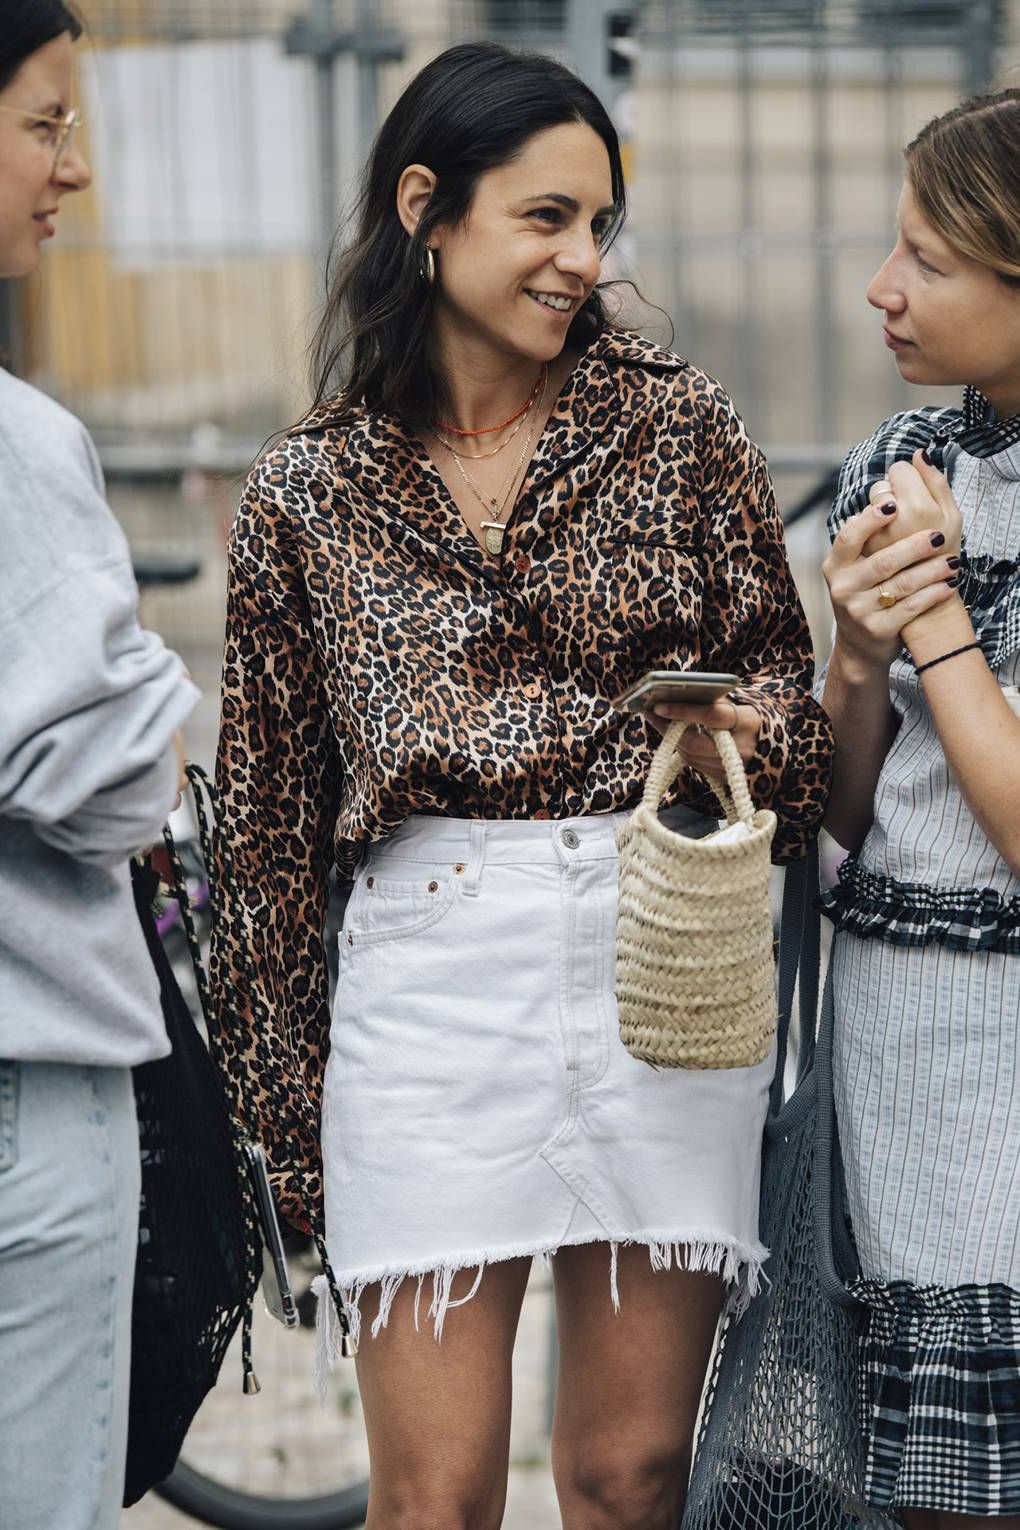 How to wear white denim skirt for summer outfit idea with leopard print shirt, layered necklaces and straw basket tote bag